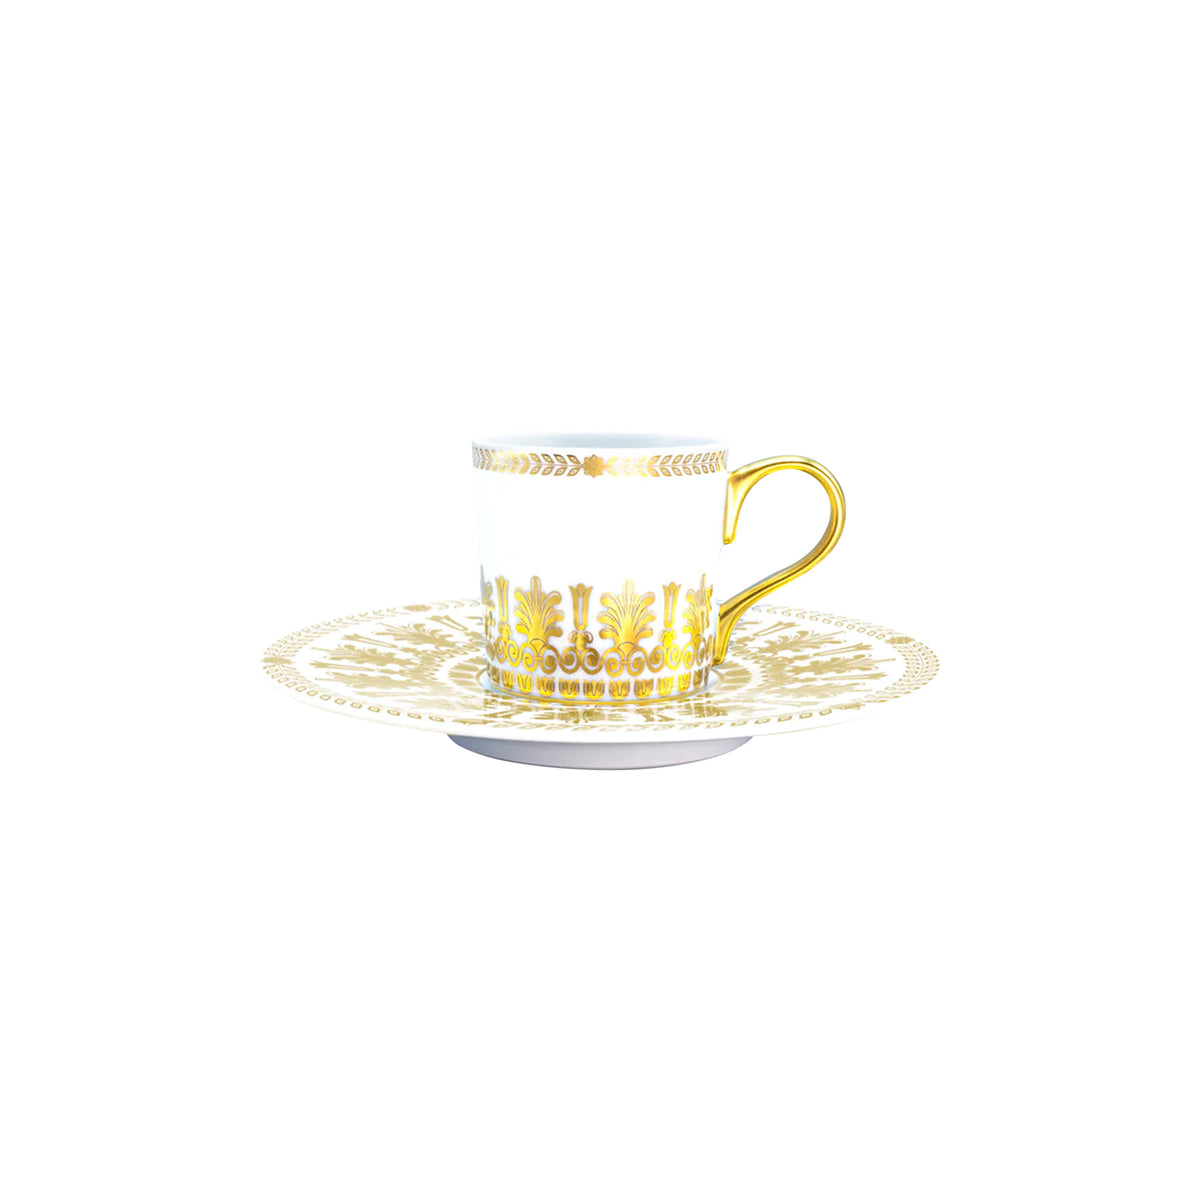 EMPIRE Gold - Coffee set (cup & saucer)